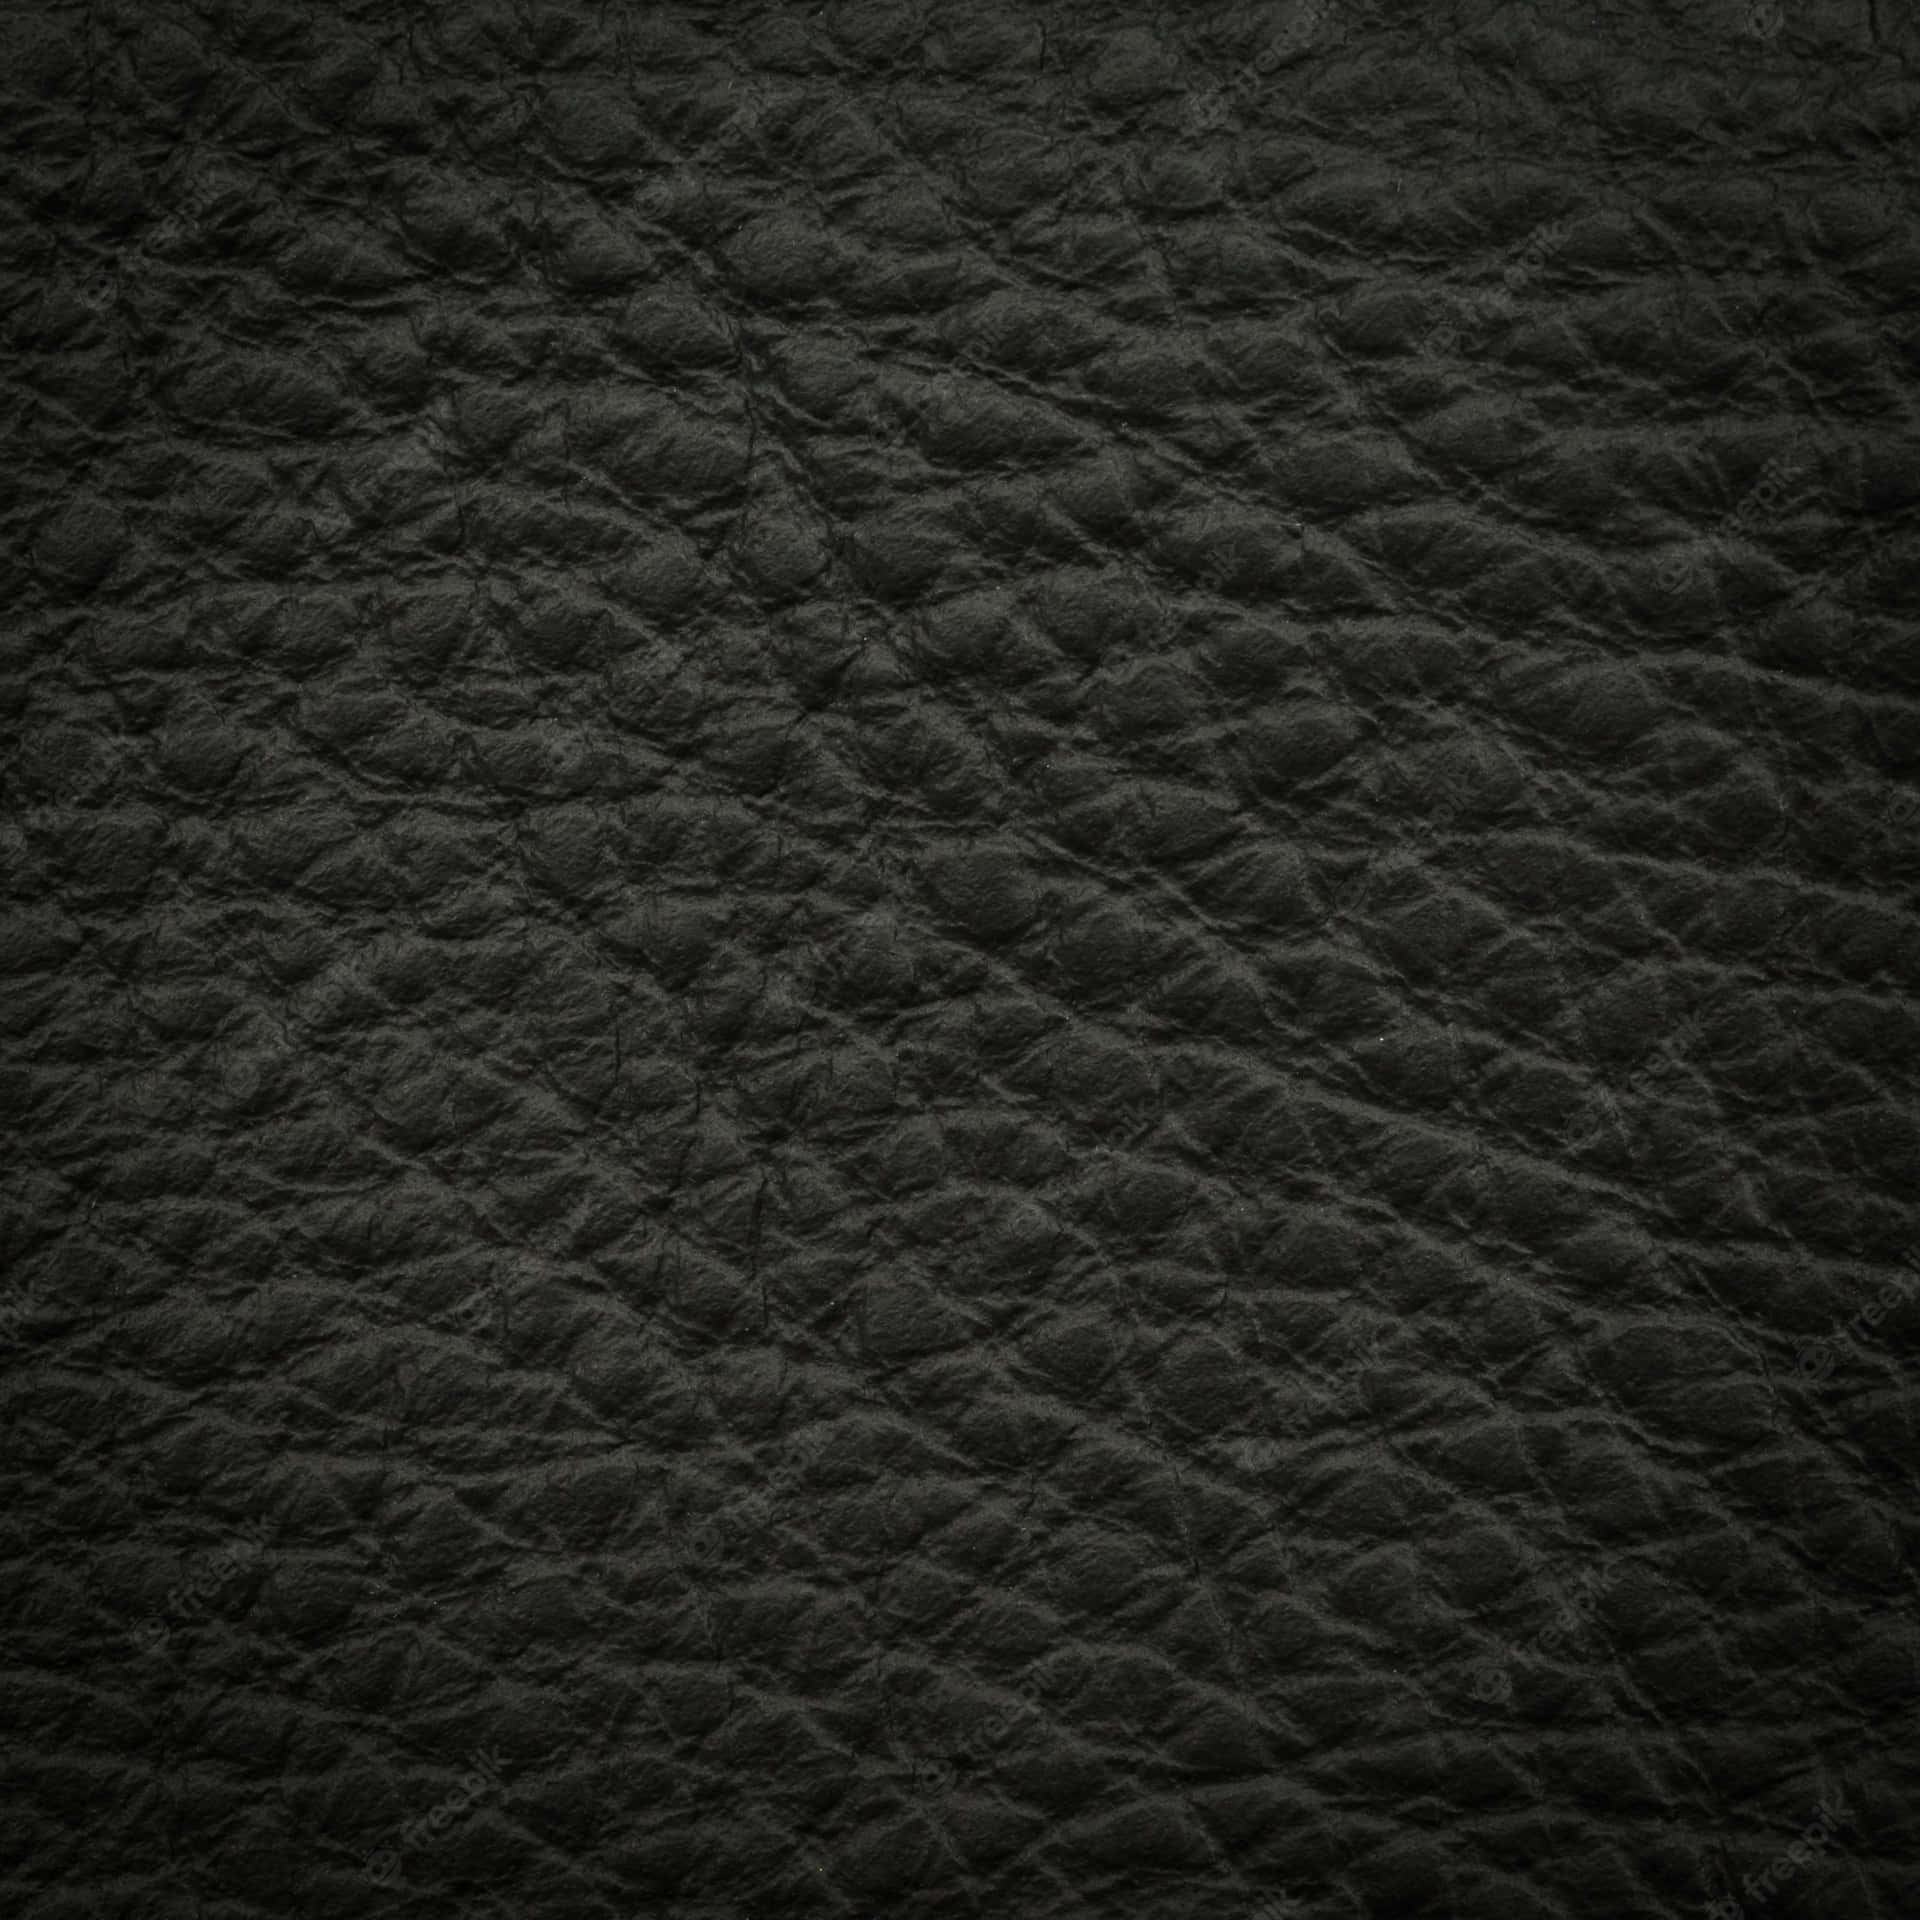 Polished black leather exudes luxury and sophistication. Wallpaper